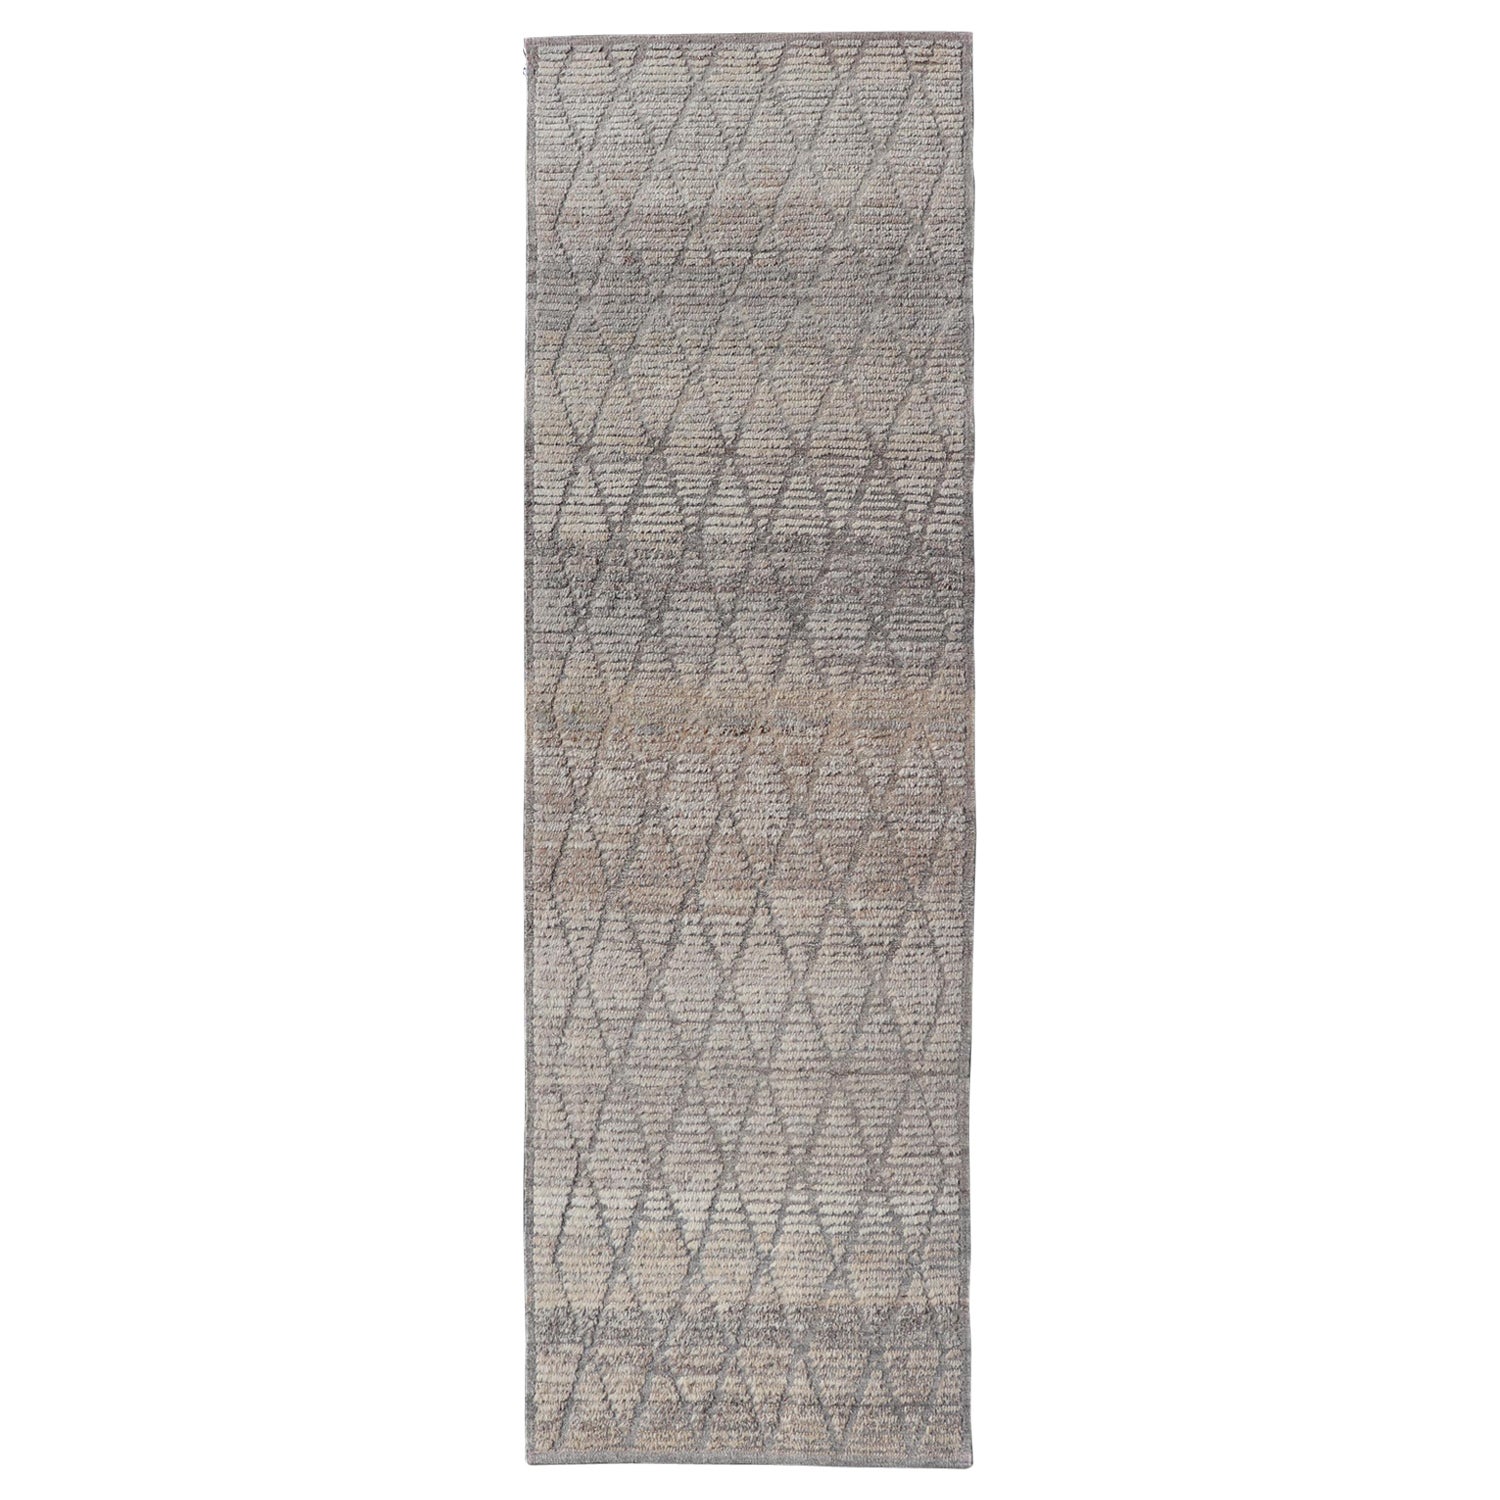 Modern Hand-Knotted Moroccan Rug with Diamond Design in Gray and Neutral Tones